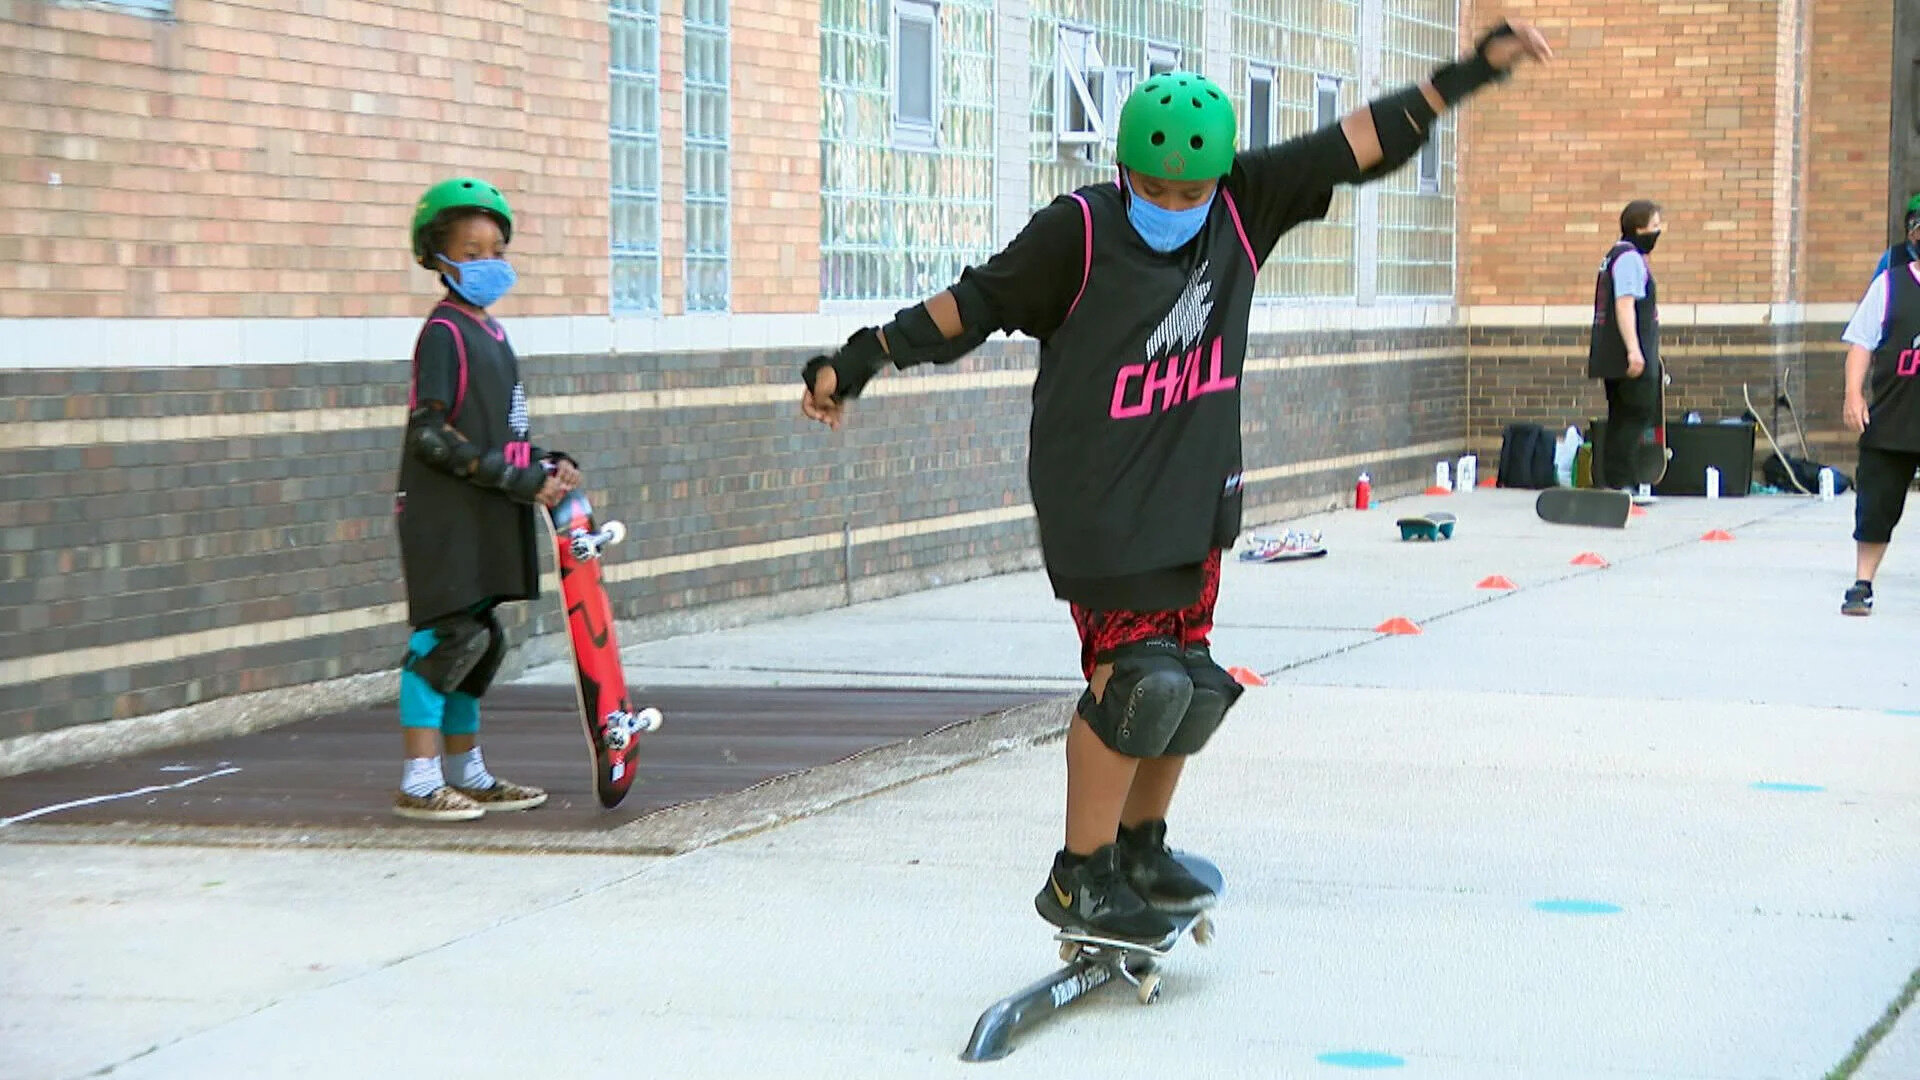 Virgil Abloh, DGK, and Chill Foundation to Launch Skateboarding